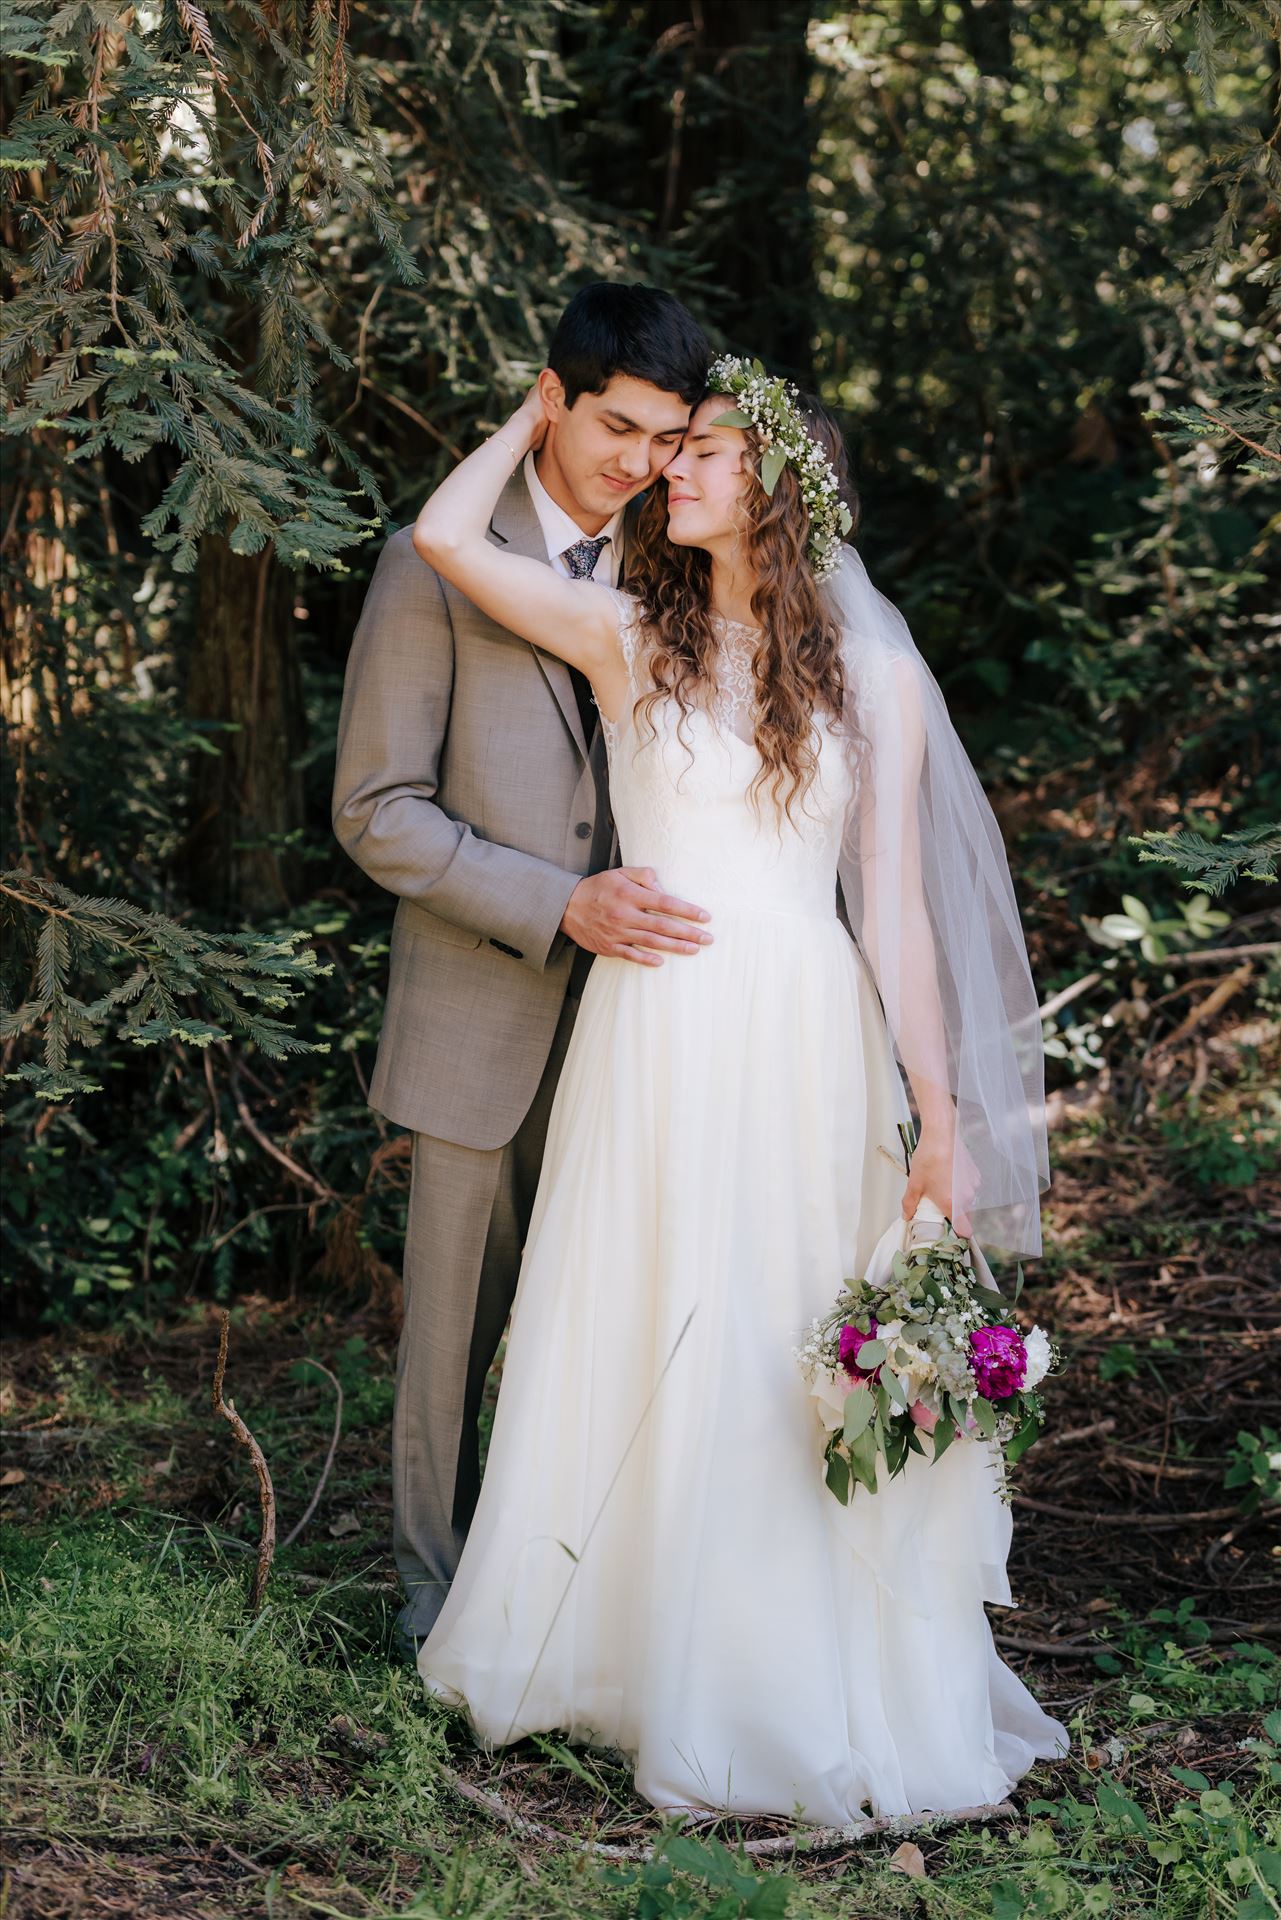 FW-5983.JPG - Mt Madonna wedding in the redwoods outside of Watsonville, California with a romantic and classic vibe by sarah williams of mirror's edge photography a san luis obispo wedding photographer.  Bride and groom romantic by Sarah Williams